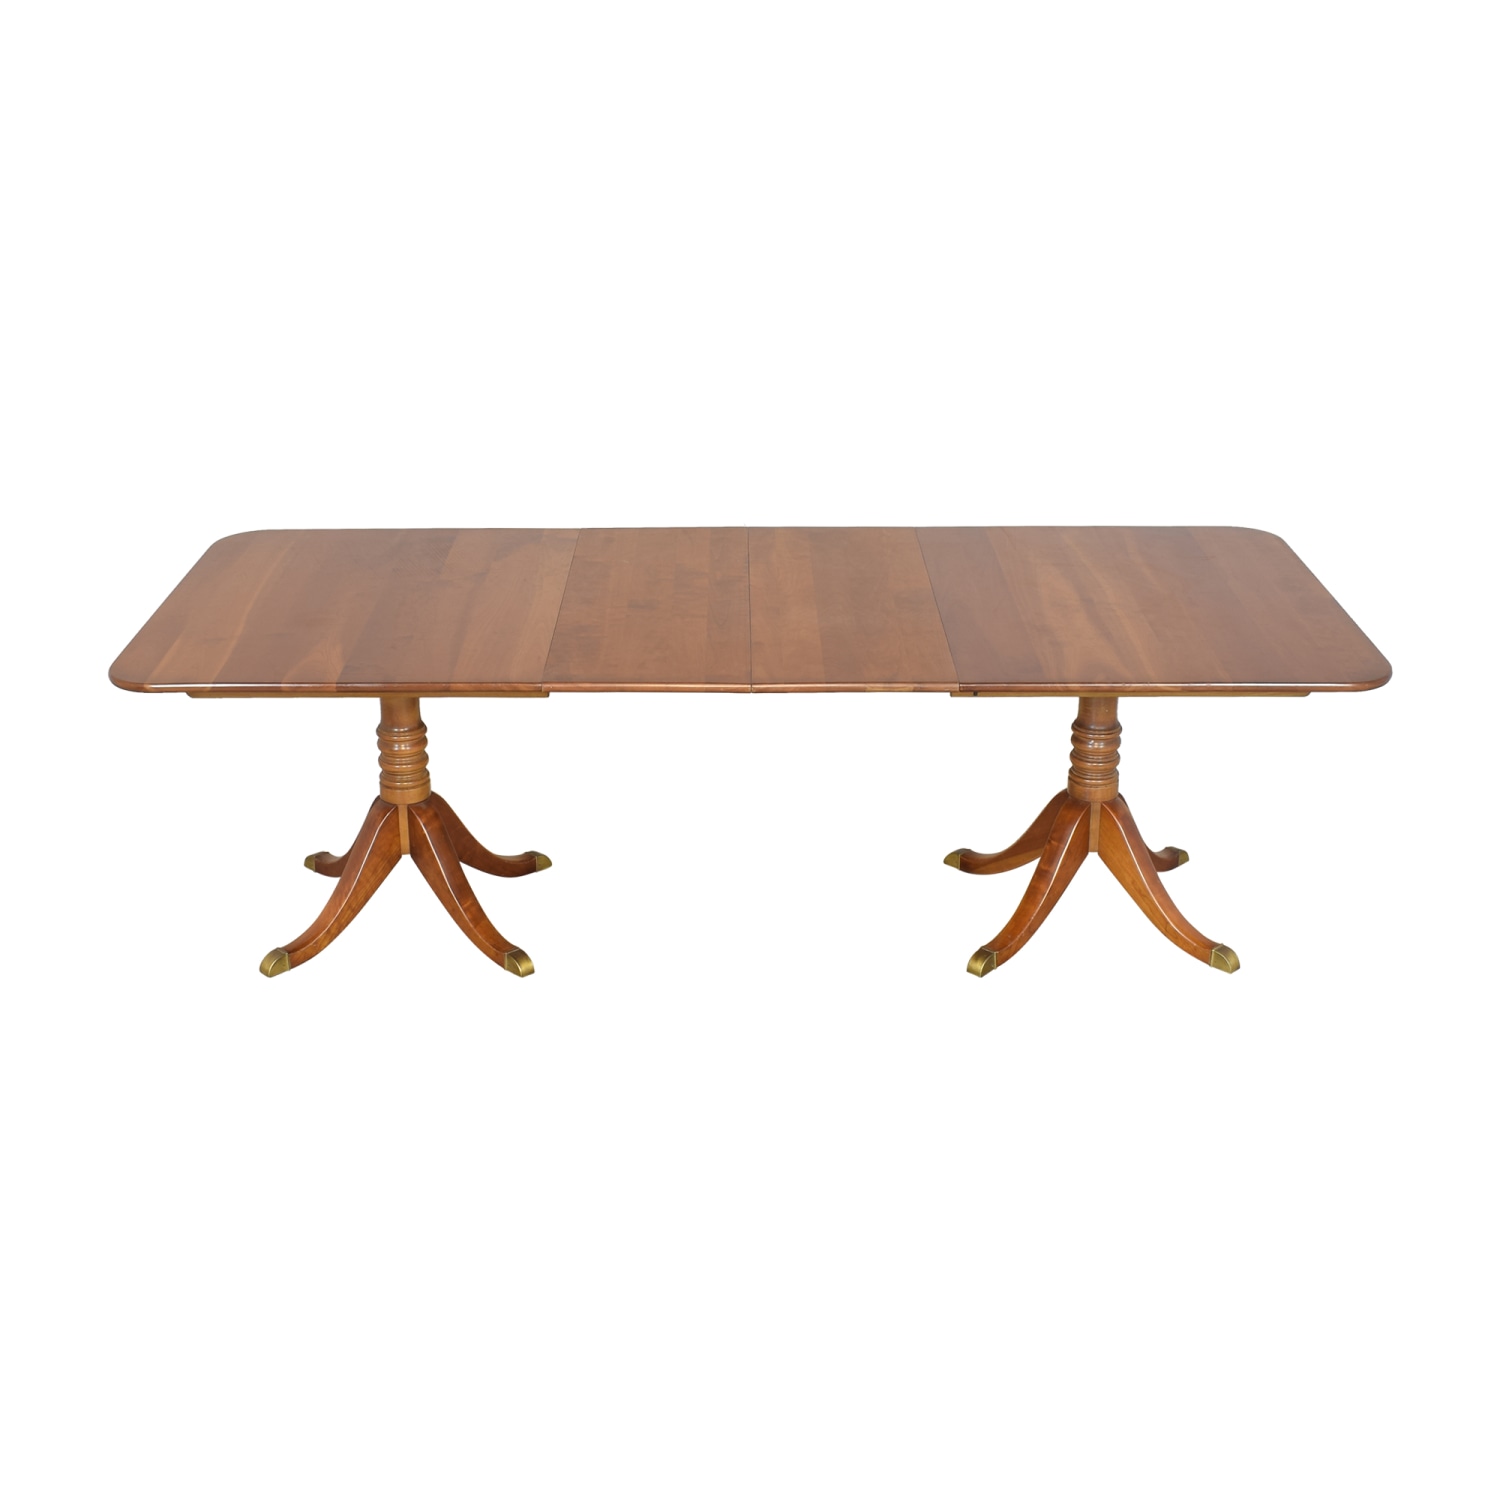 Stickley Furniture Stickley Furniture Double Pedestal Extendable Dining Table price